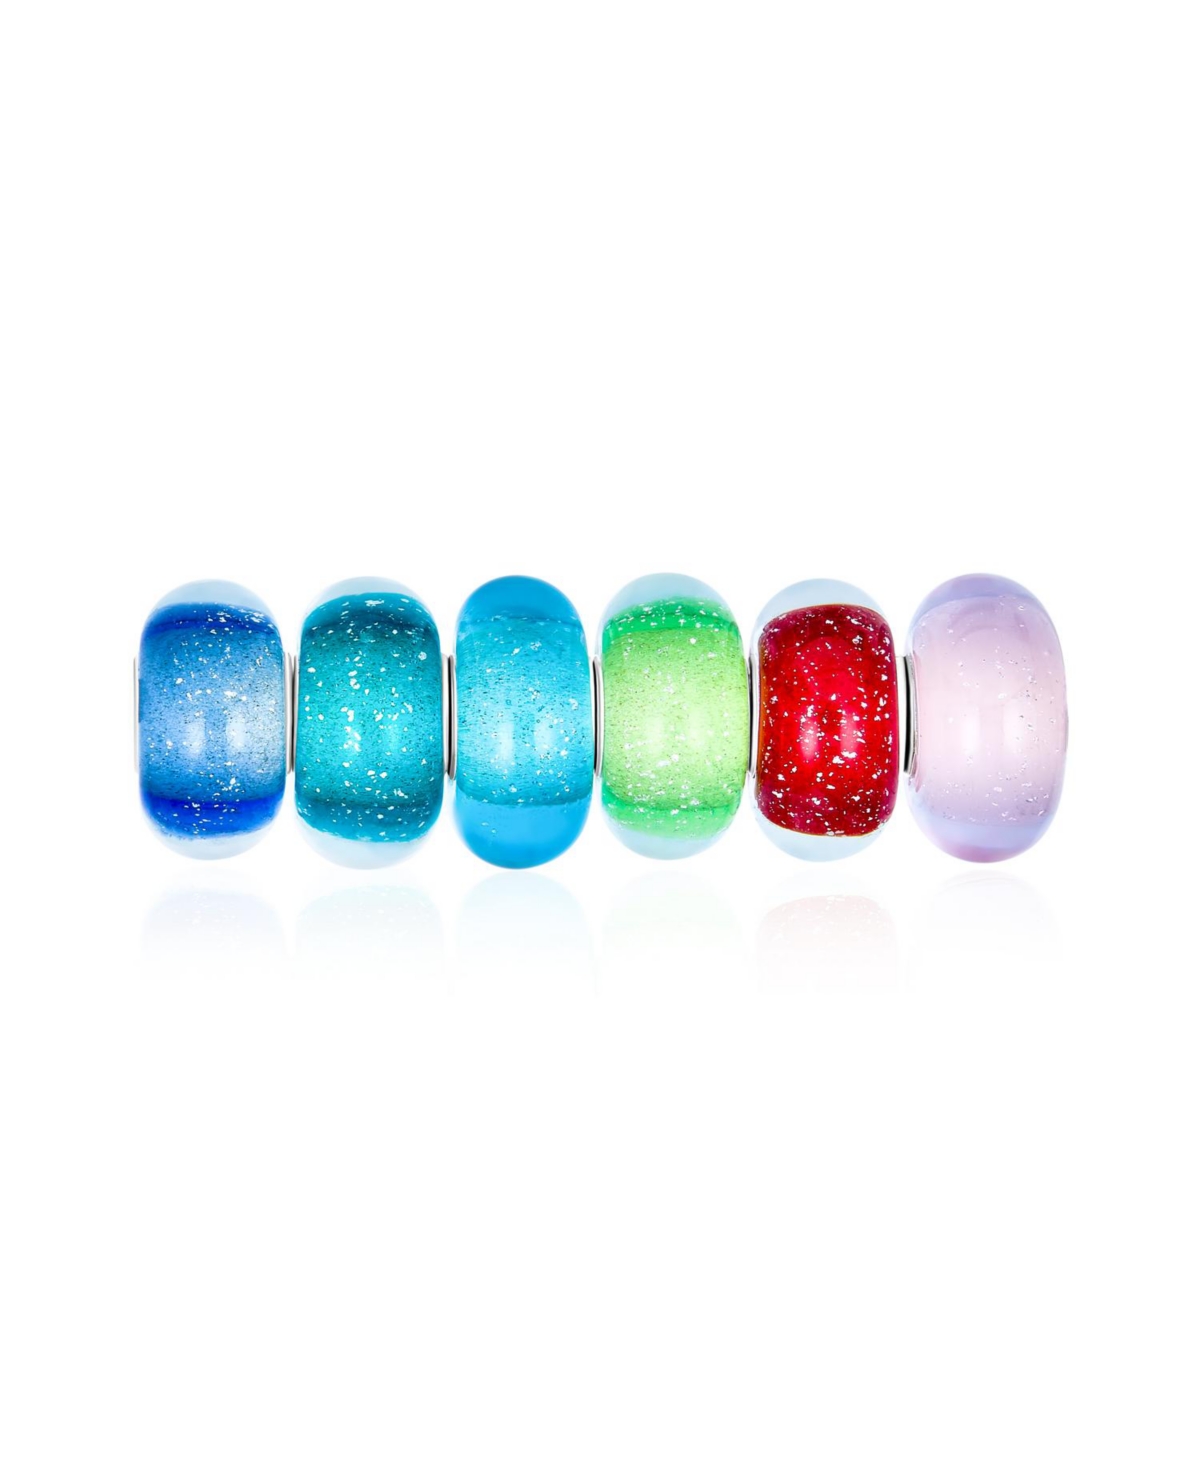 Multi Colors Mixed Set Of 6 Bundle .925 Sterling Silver Core Translucent Jewel Tones Murano Glass Bubble Charm Bead Spacer Fits European